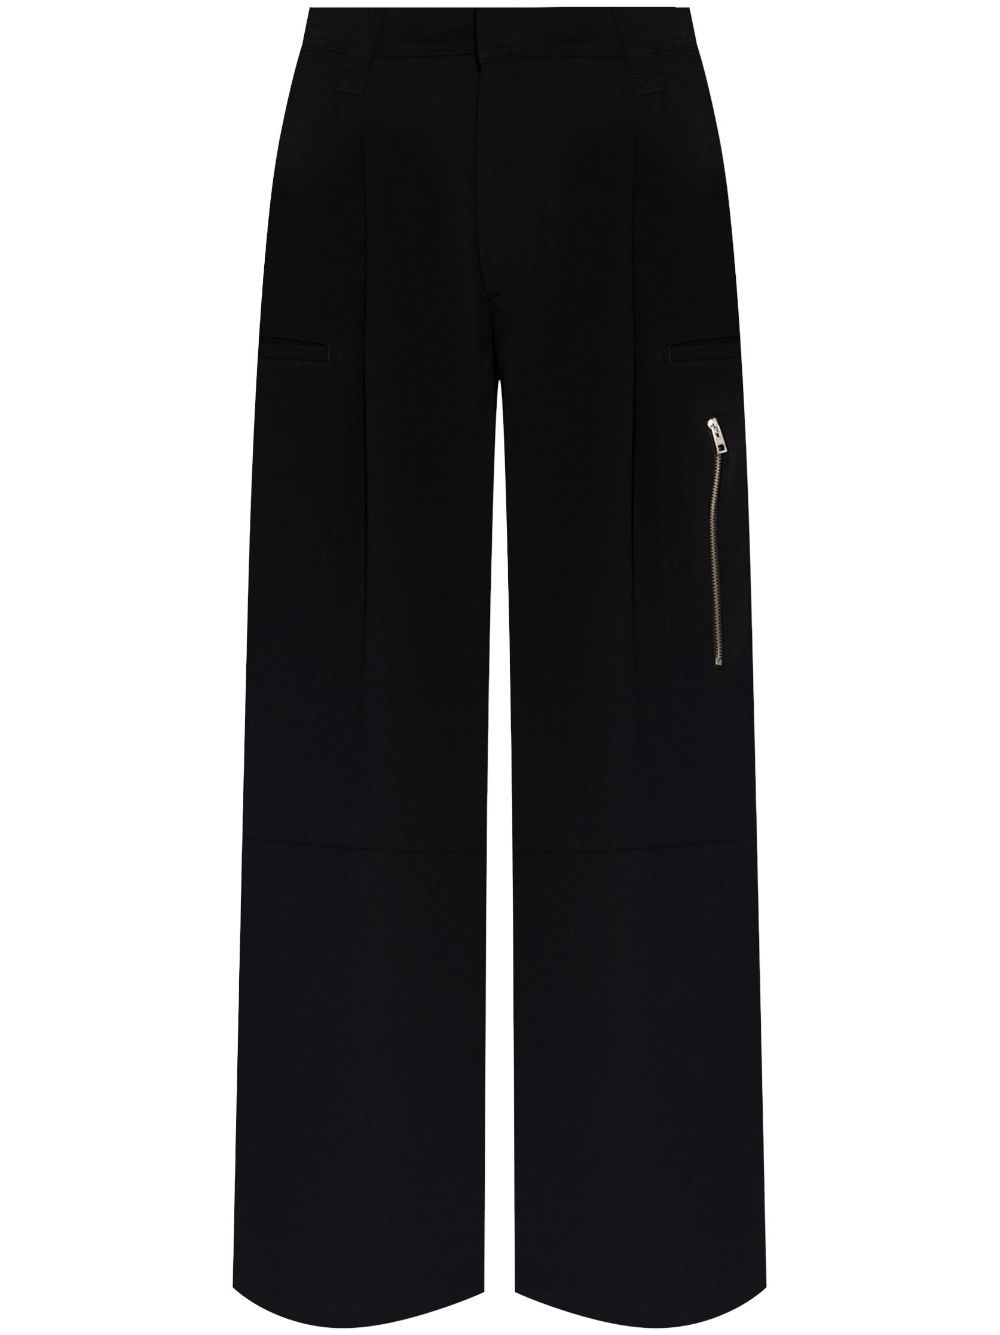 low-rise multi-pockets palazzo trousers